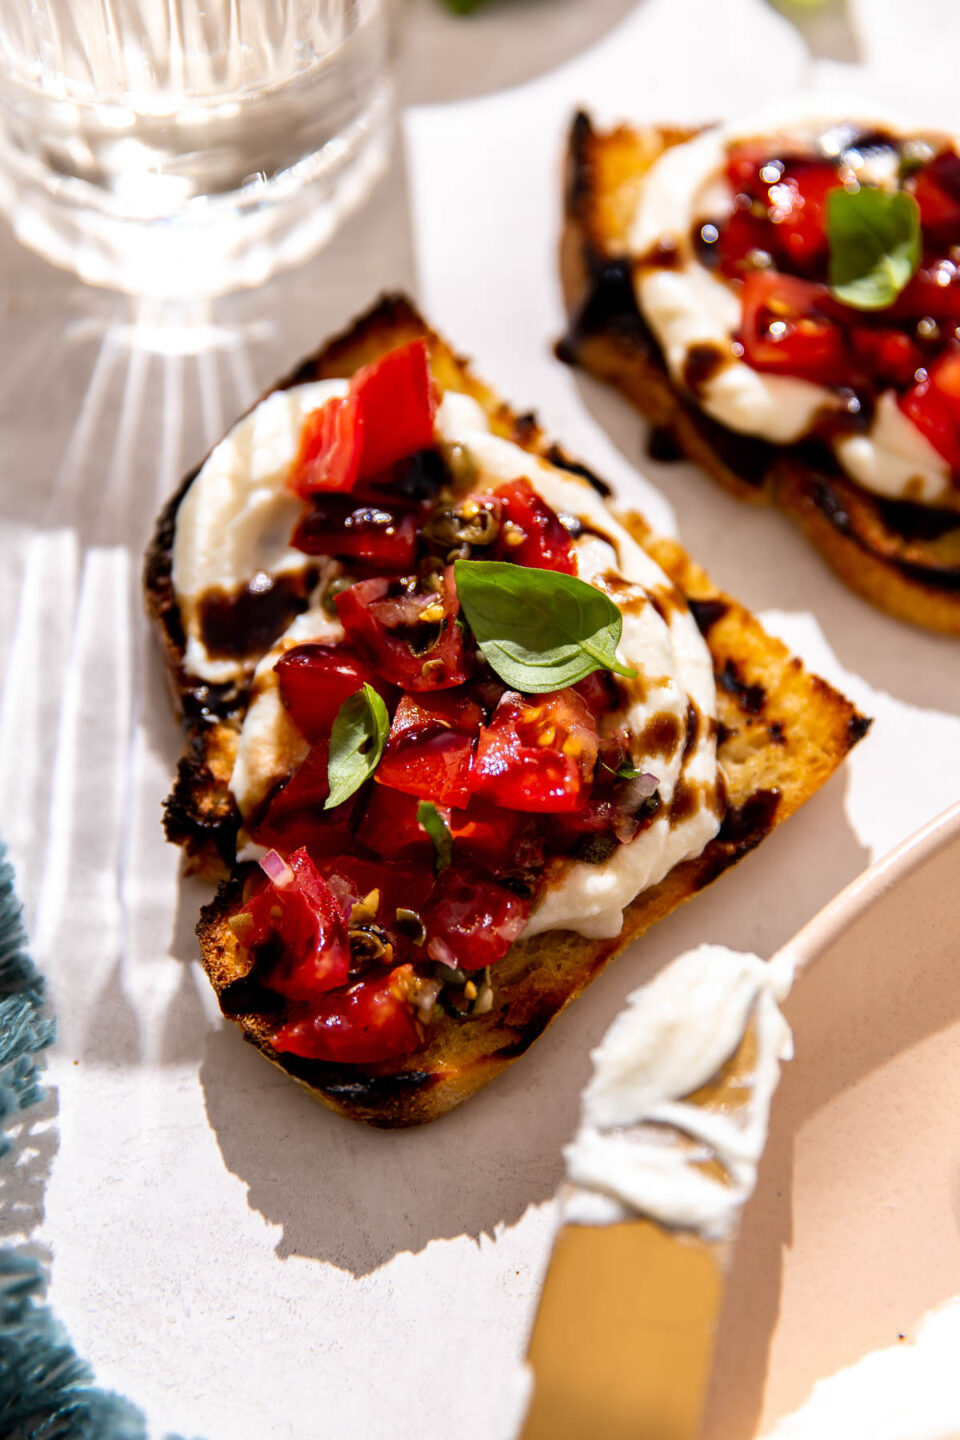 A side angle shot of two pieces of ricotta bruschetta served on grilled bread that sit atop a white textured surface. A blue linen napkin, a peach colored platter with a gold knife used to spread ricotta sitting atop, and a clear glass filled with white wine surround the two pieces of whipped ricotta bruschetta.